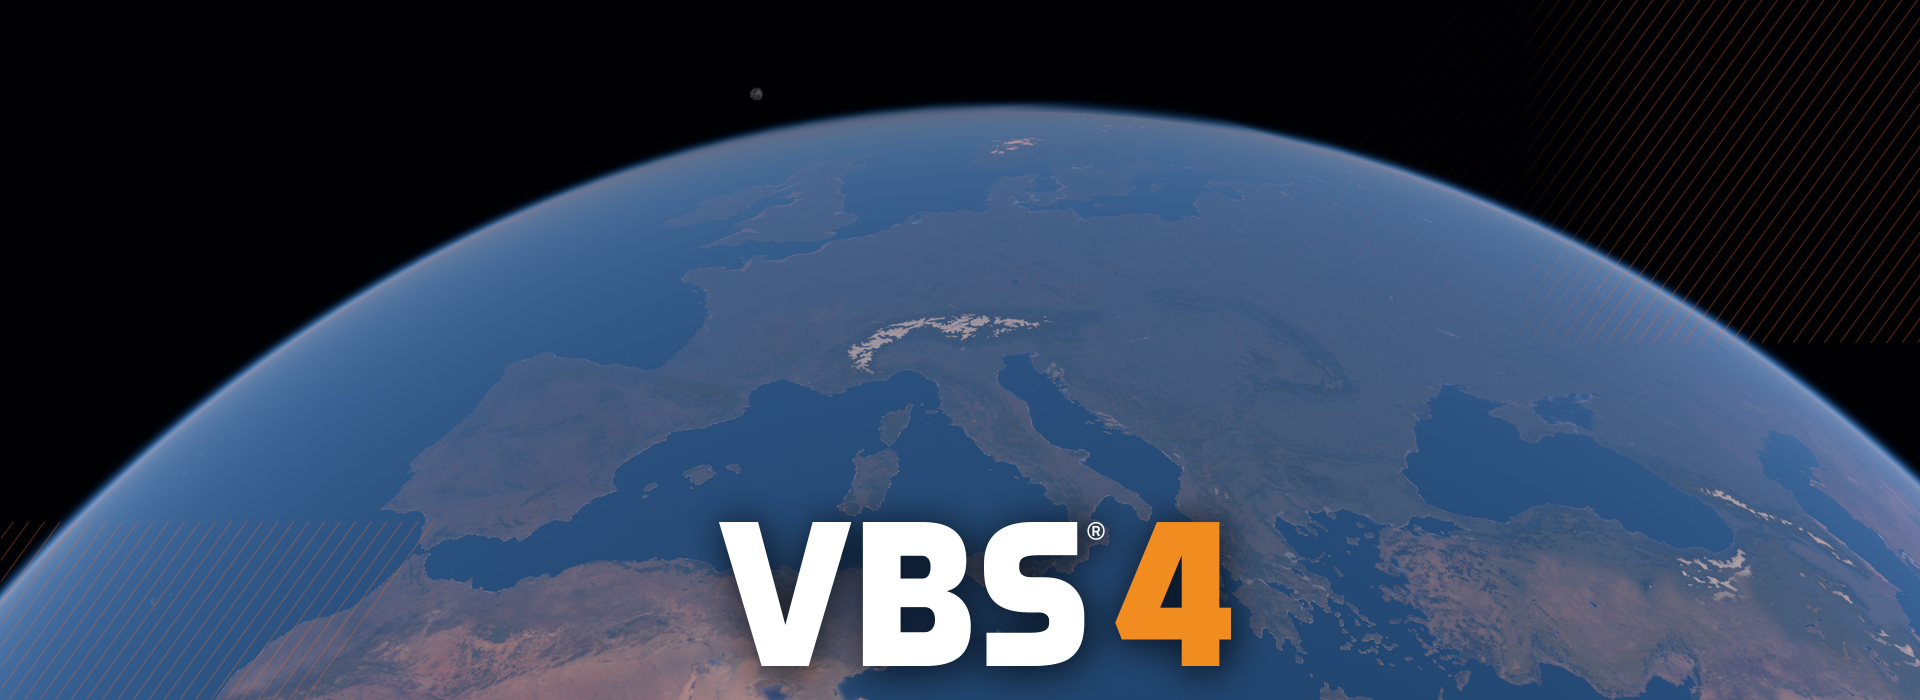 bisim_demonstrates_new_flagship_product_vbs4_at_iitsec_2019